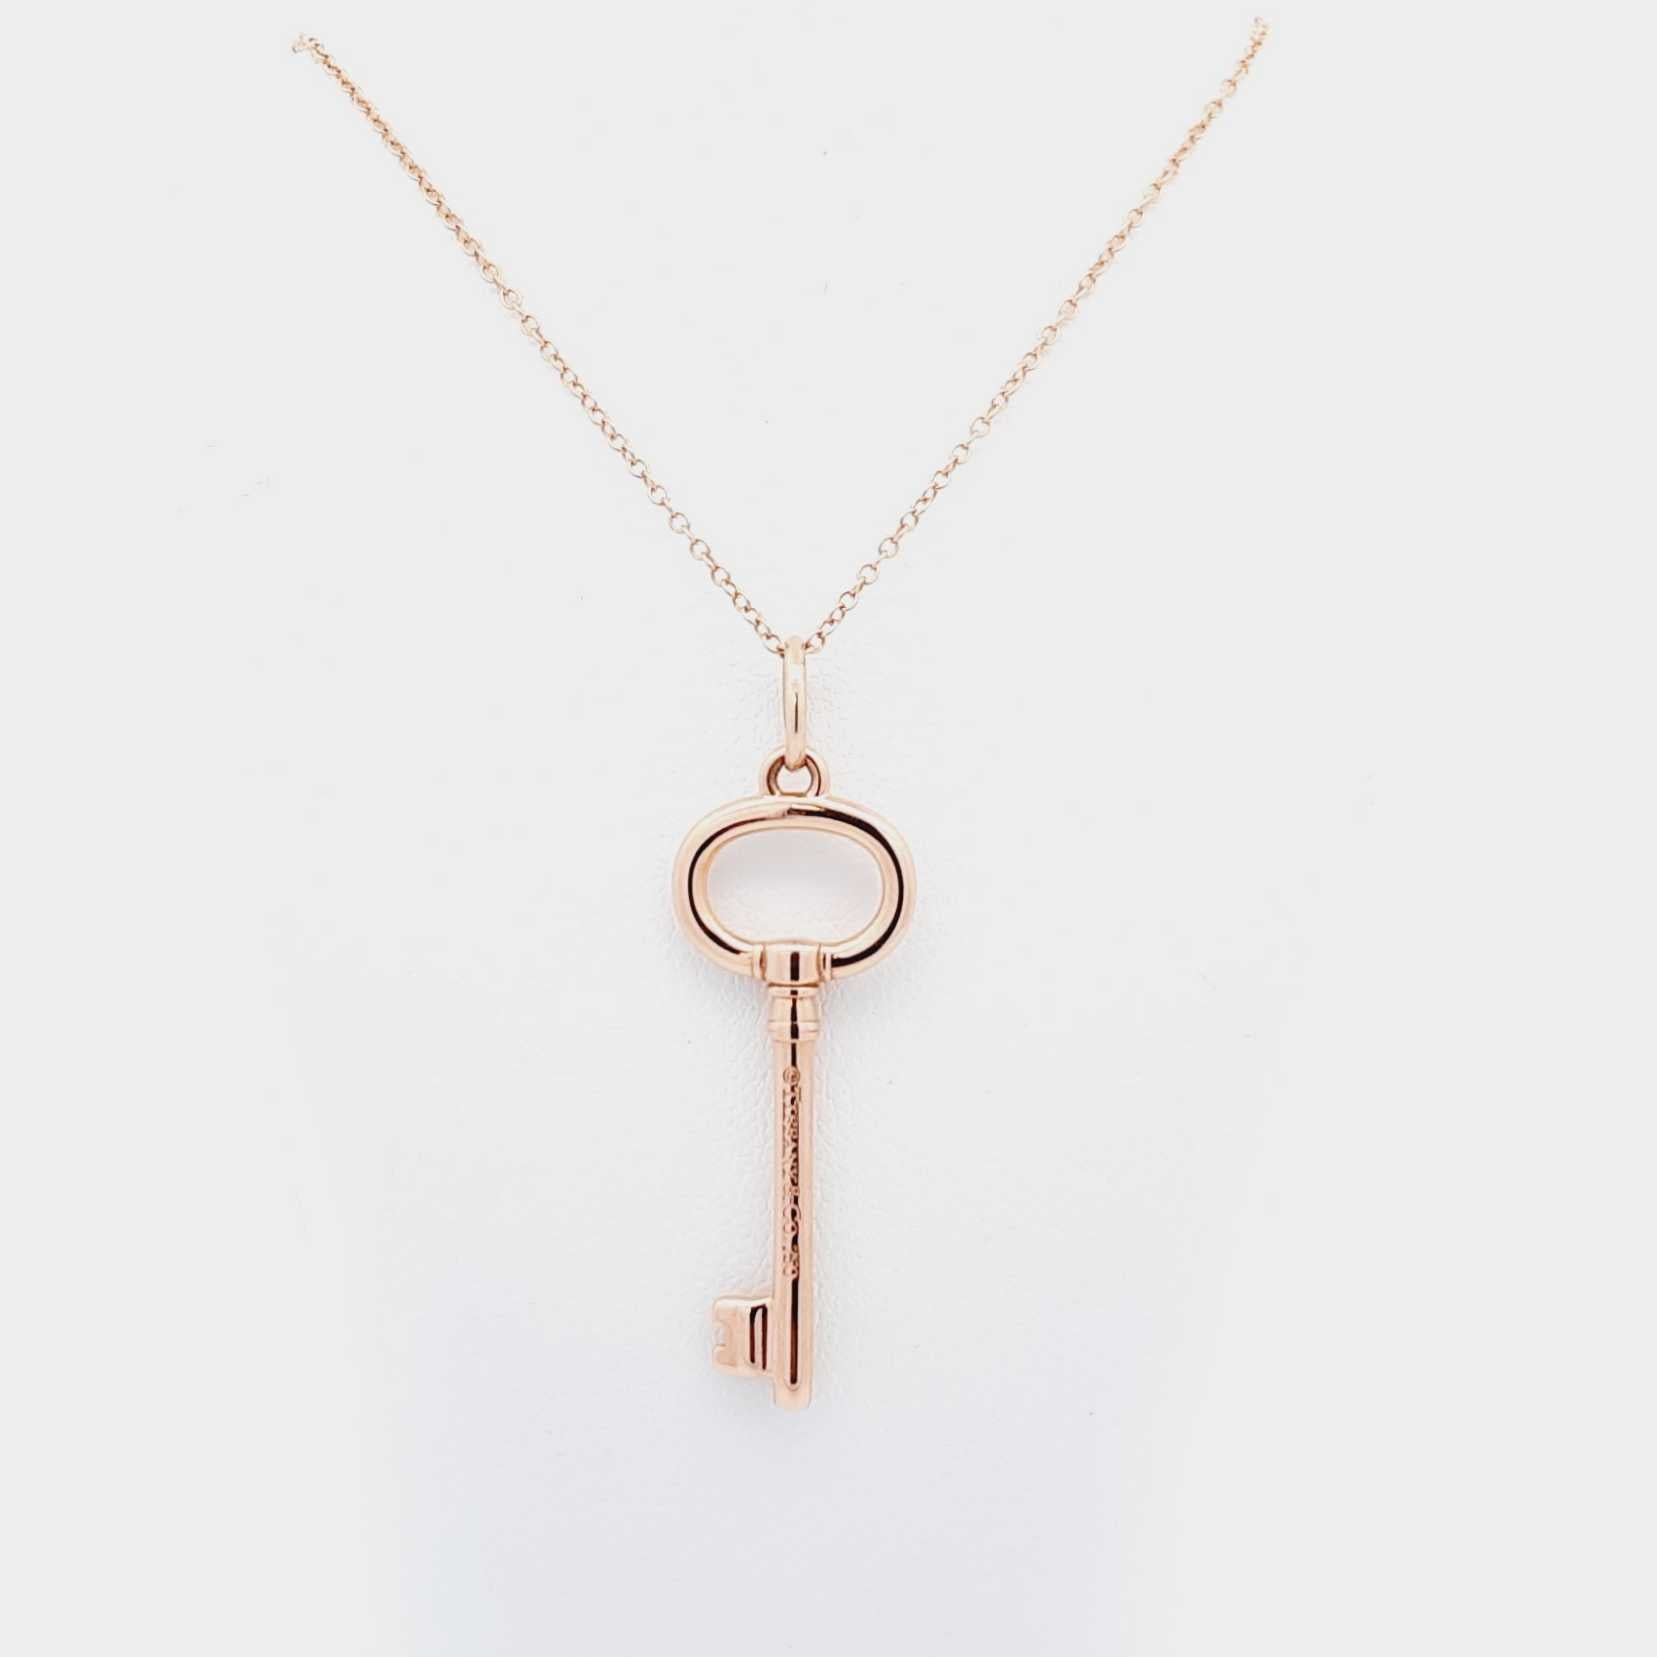 Tiny Rose Gold Classic Key Necklace, Rose Gold Sterling Silver Key Necklace,  Key Necklace, Layering Necklace Hand Made